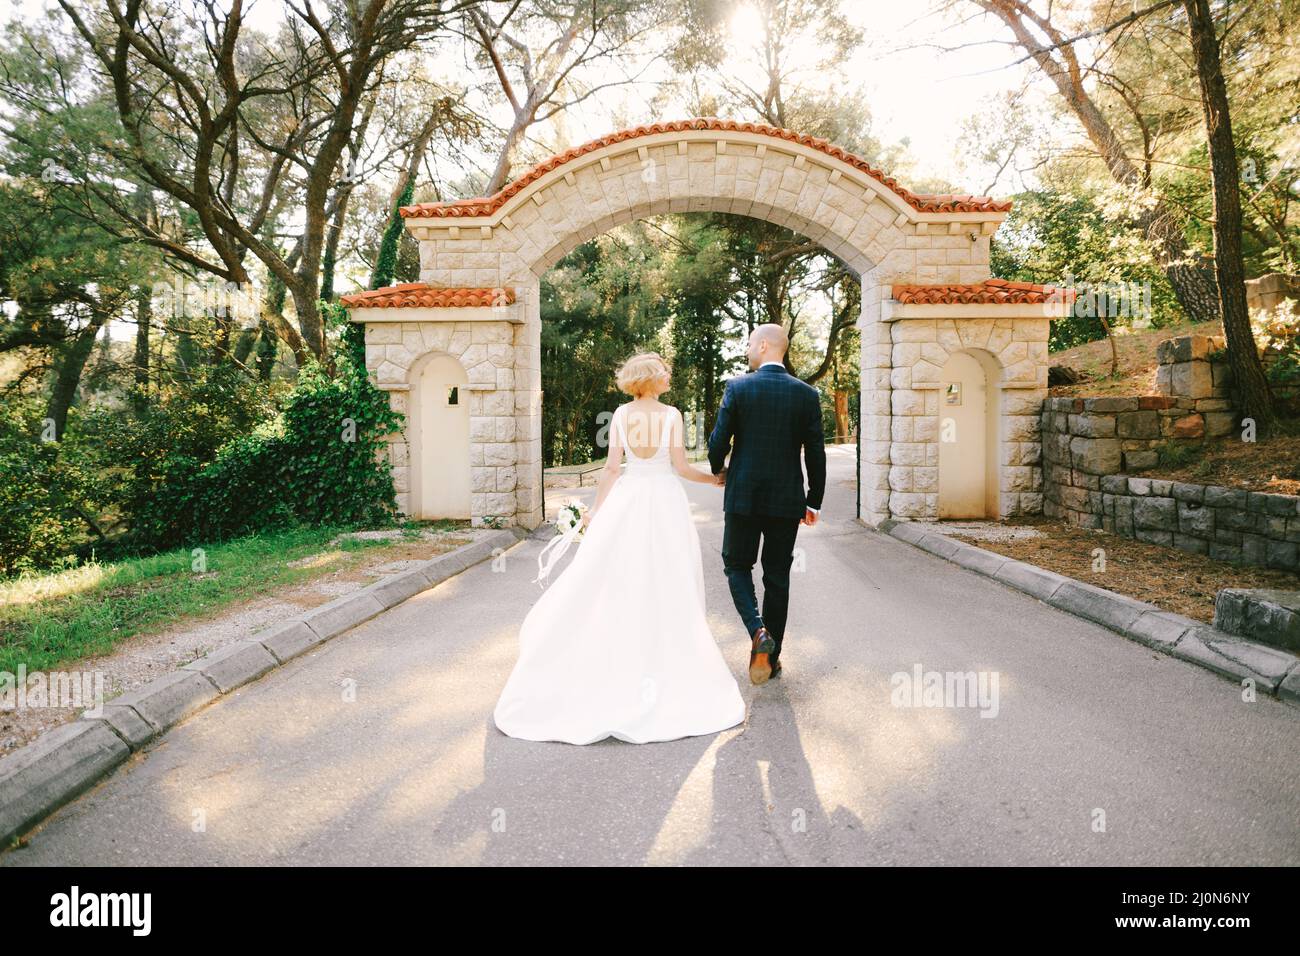 Newlyweds walk along the path holding hands to the entrance stone gate with orange tiles in a green park. Back view Stock Photo